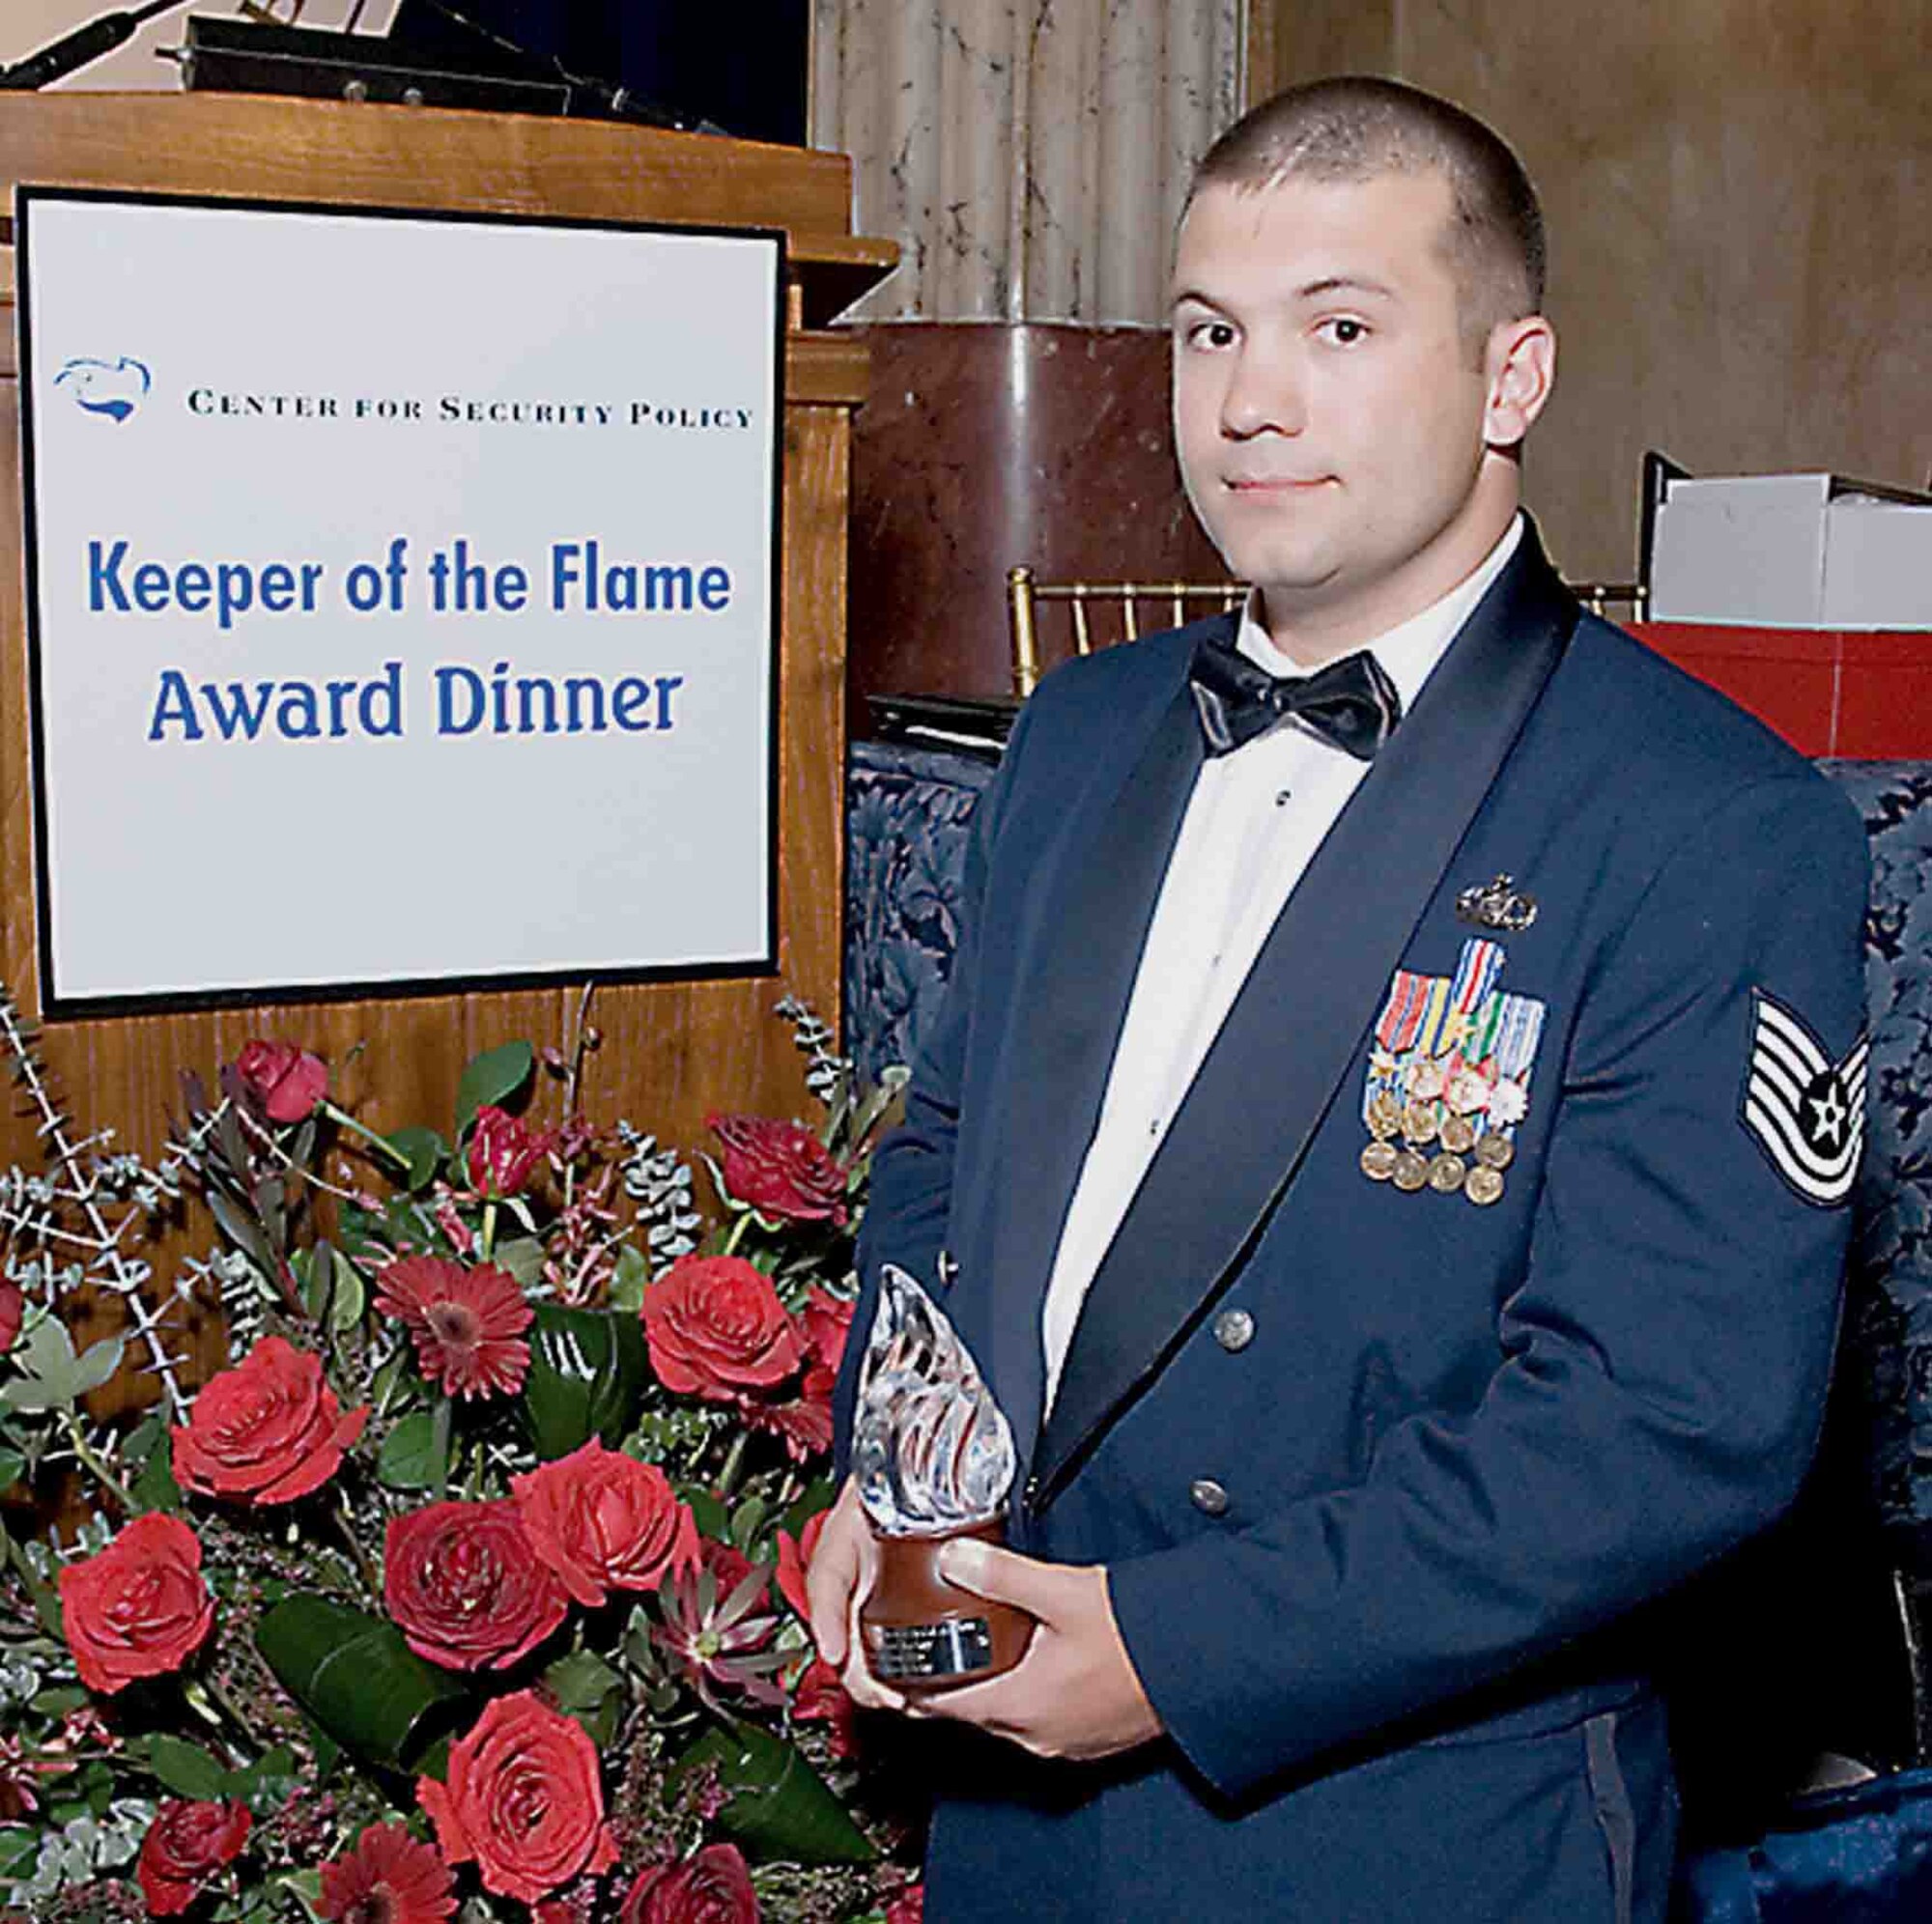 Tech. Sgt. Stephen Achey, 682nd Air Support Operations Squadron, was presented the Keeper of the Flame Award Wednesday in Washington, D.C., for his acts of heroism while in Afghanistan. (U.S. Air Force photo/Dennis Kan)
